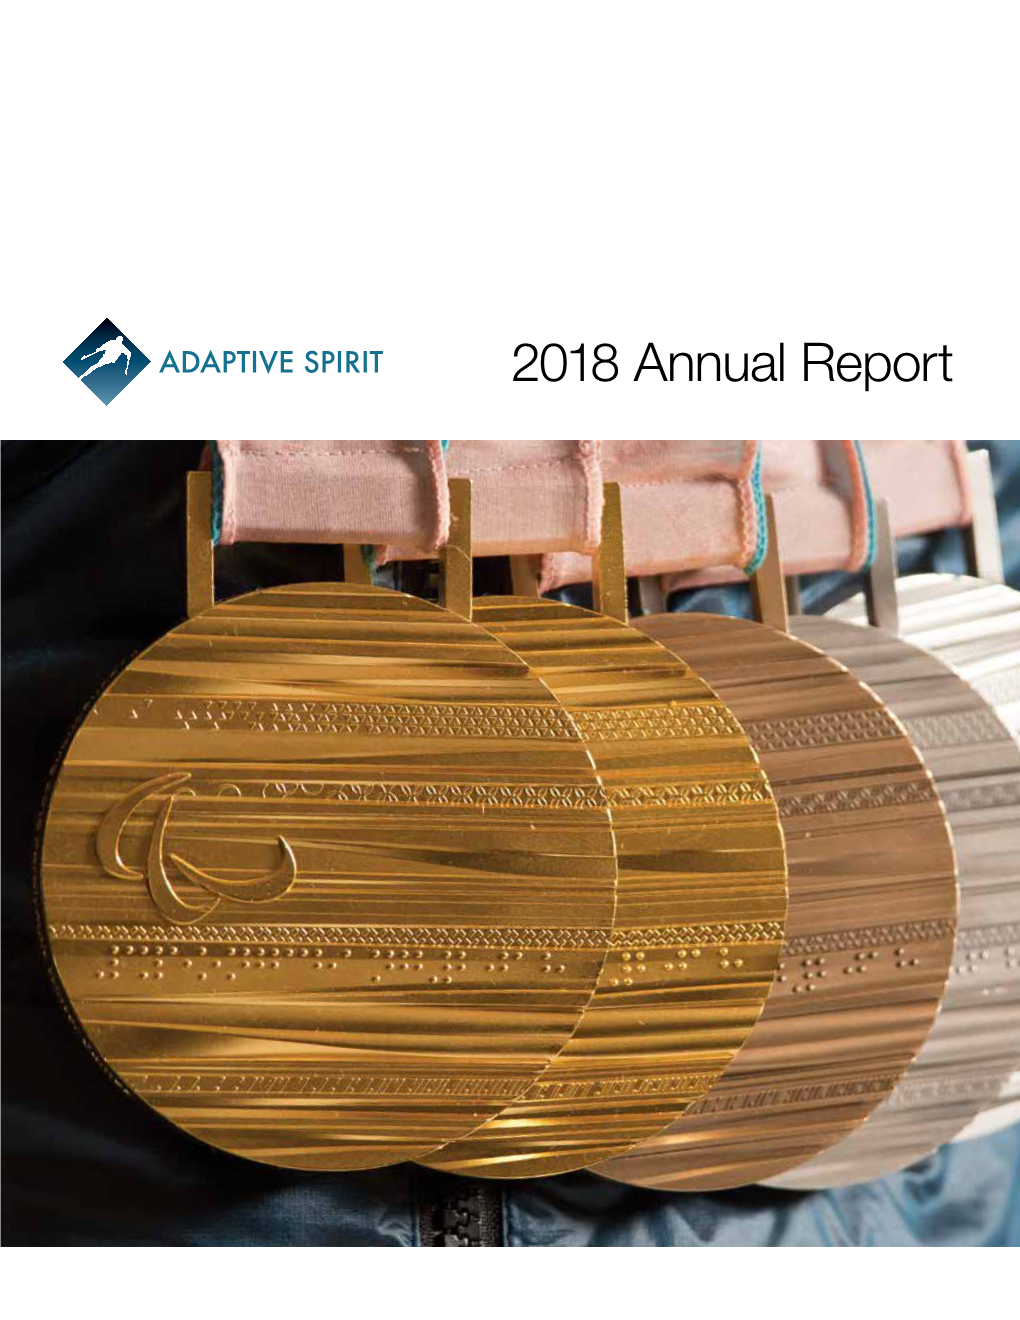 2018 Annual Report Way to Adaptive Spirit Being the Best Networking Event in Our Industry